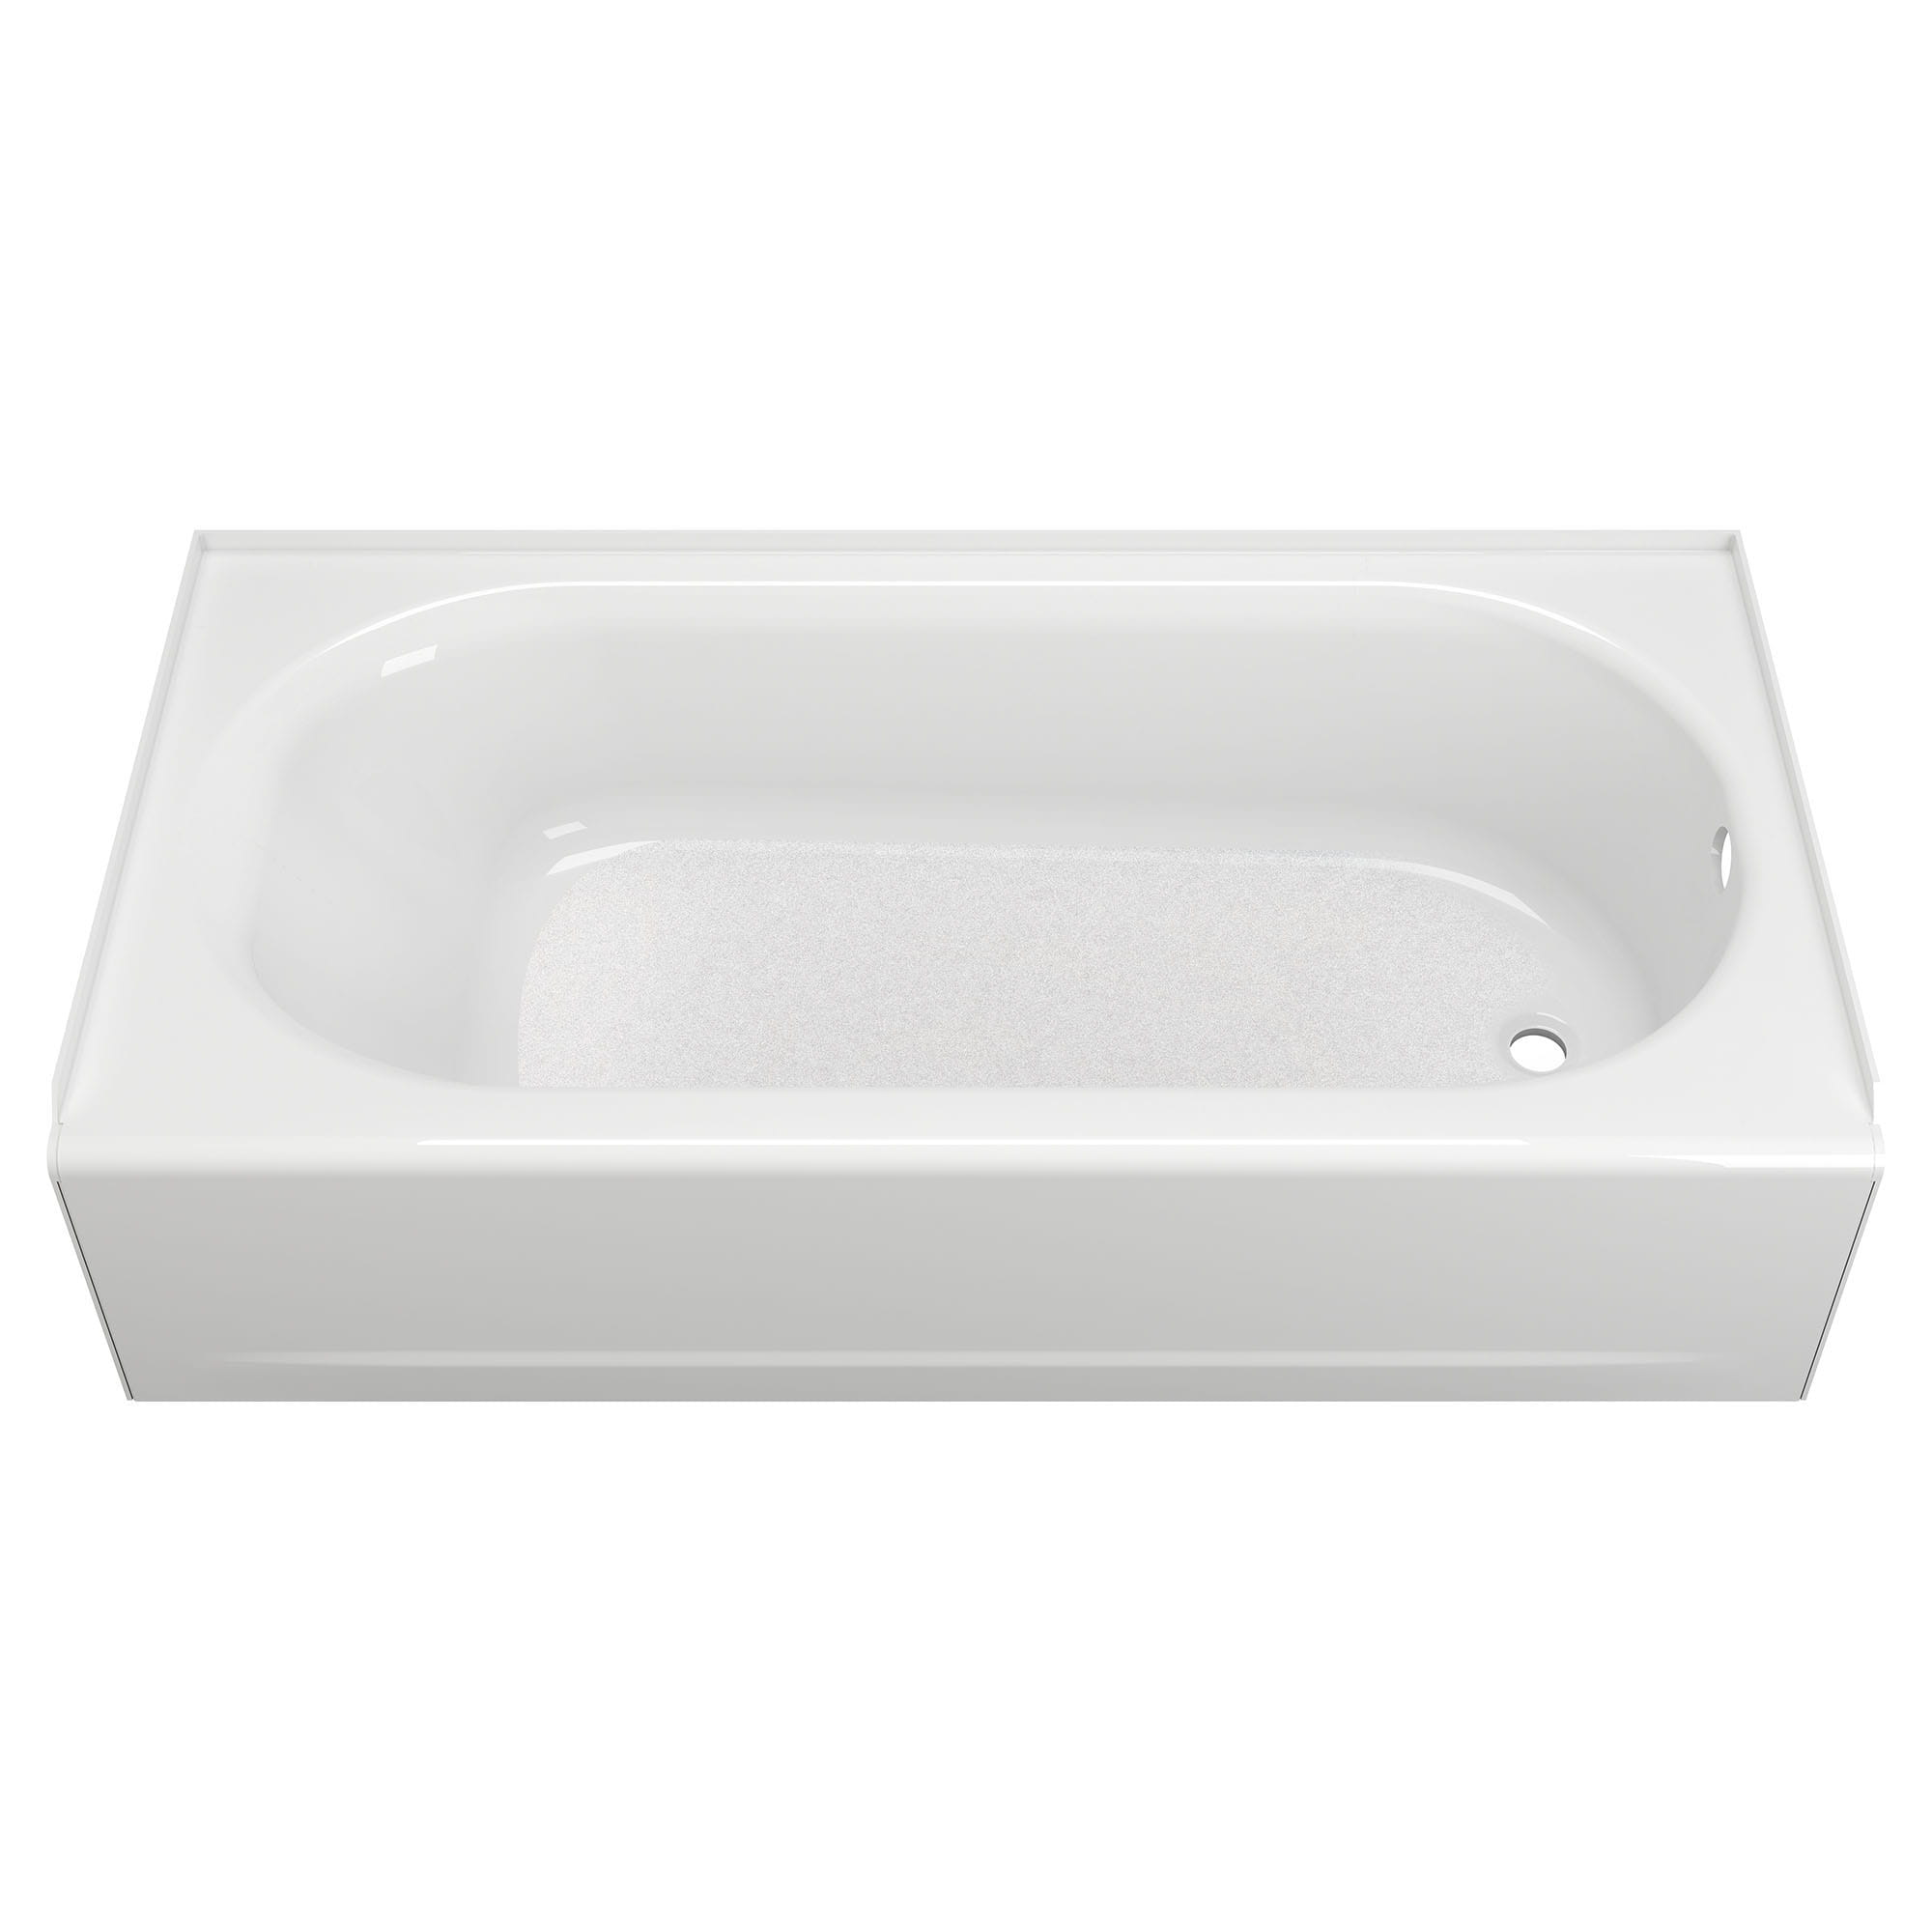 Princeton® Americast® 60 x 30-Inch Integral Apron Bathtub with Right-Hand Outlet